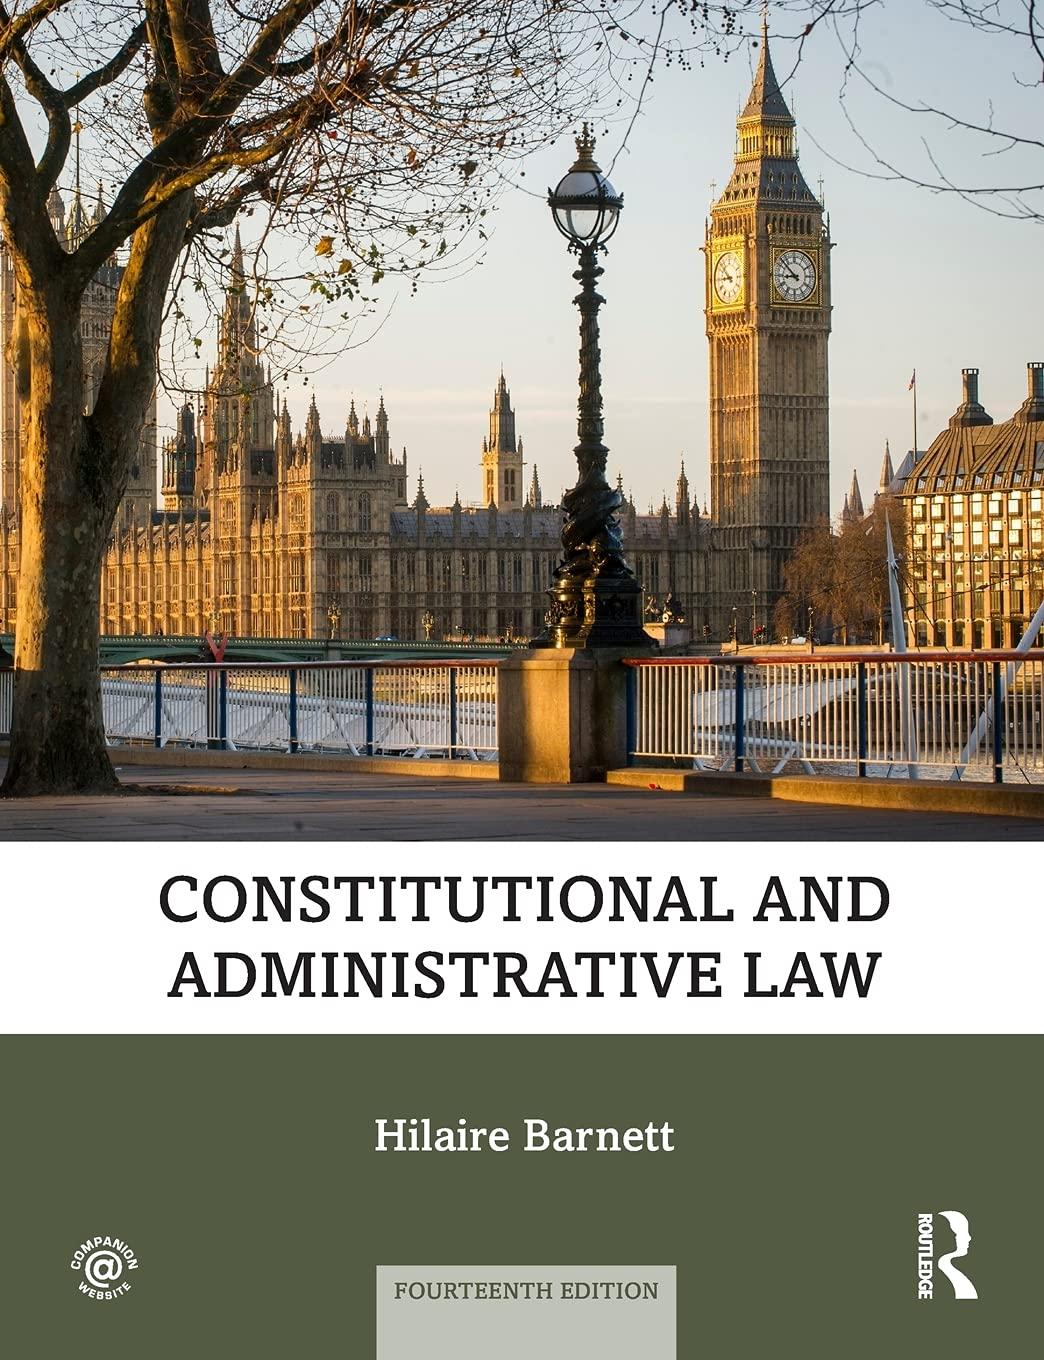 constitutional and administrative law 14th edition hilaire barnett 036756632x, 978-0367566326